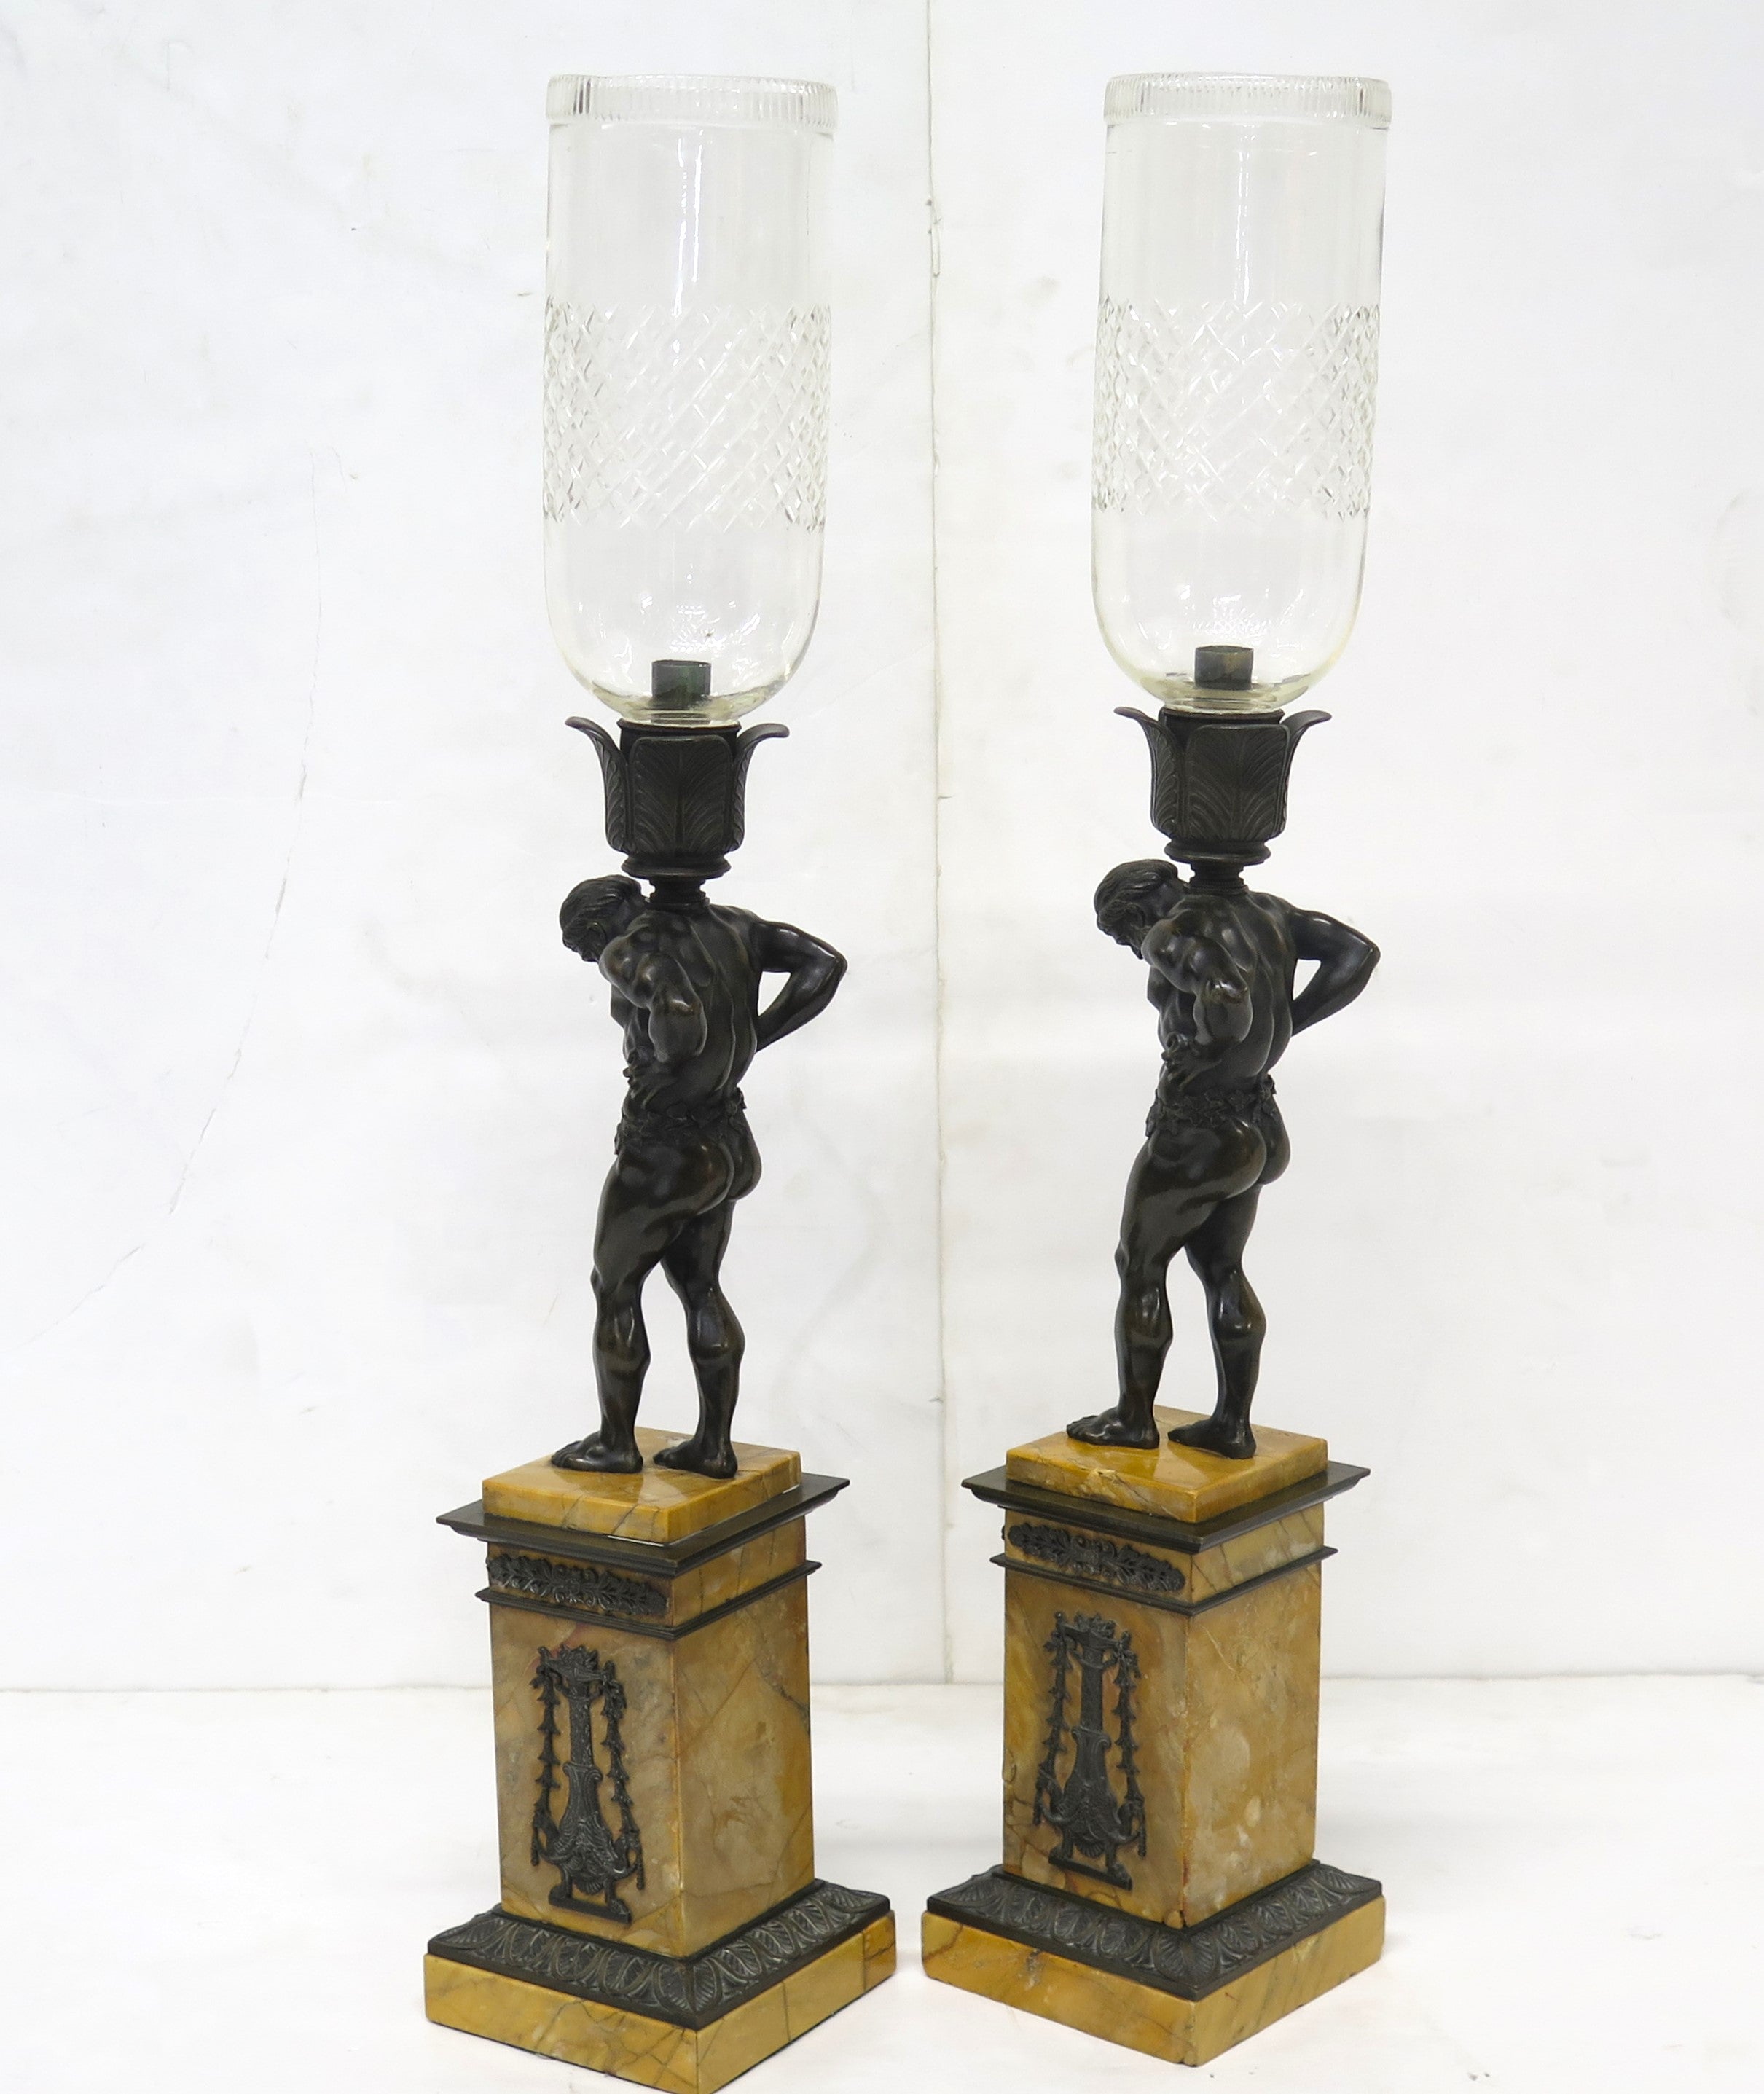 Pair of French Restoration Period Candlesticks of Patinated Bronze and Gilt Bronze with Figures of Atlas